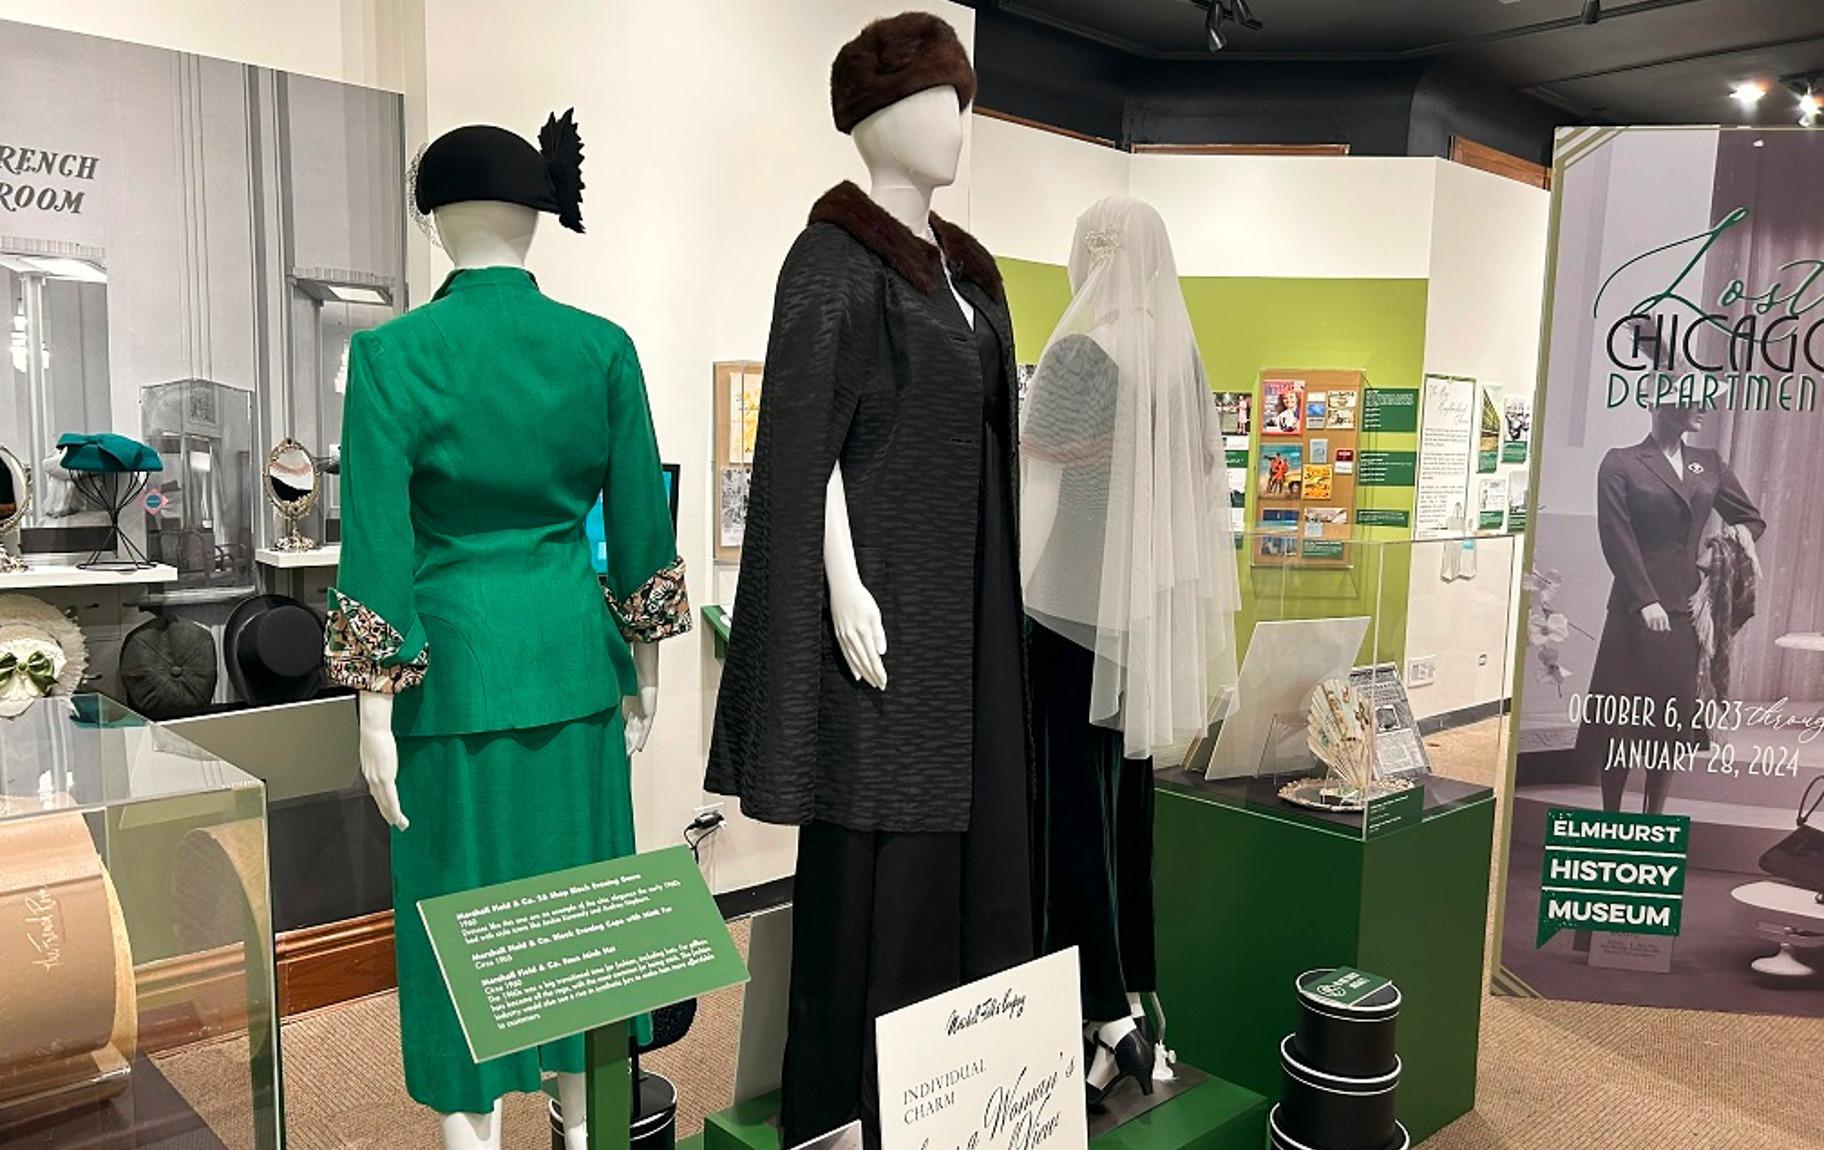 “Lost Chicagoland Department Stores” runs at the Elmhurst History Museum through Jan. 28. (Courtesy of Elmhurst History Museum)